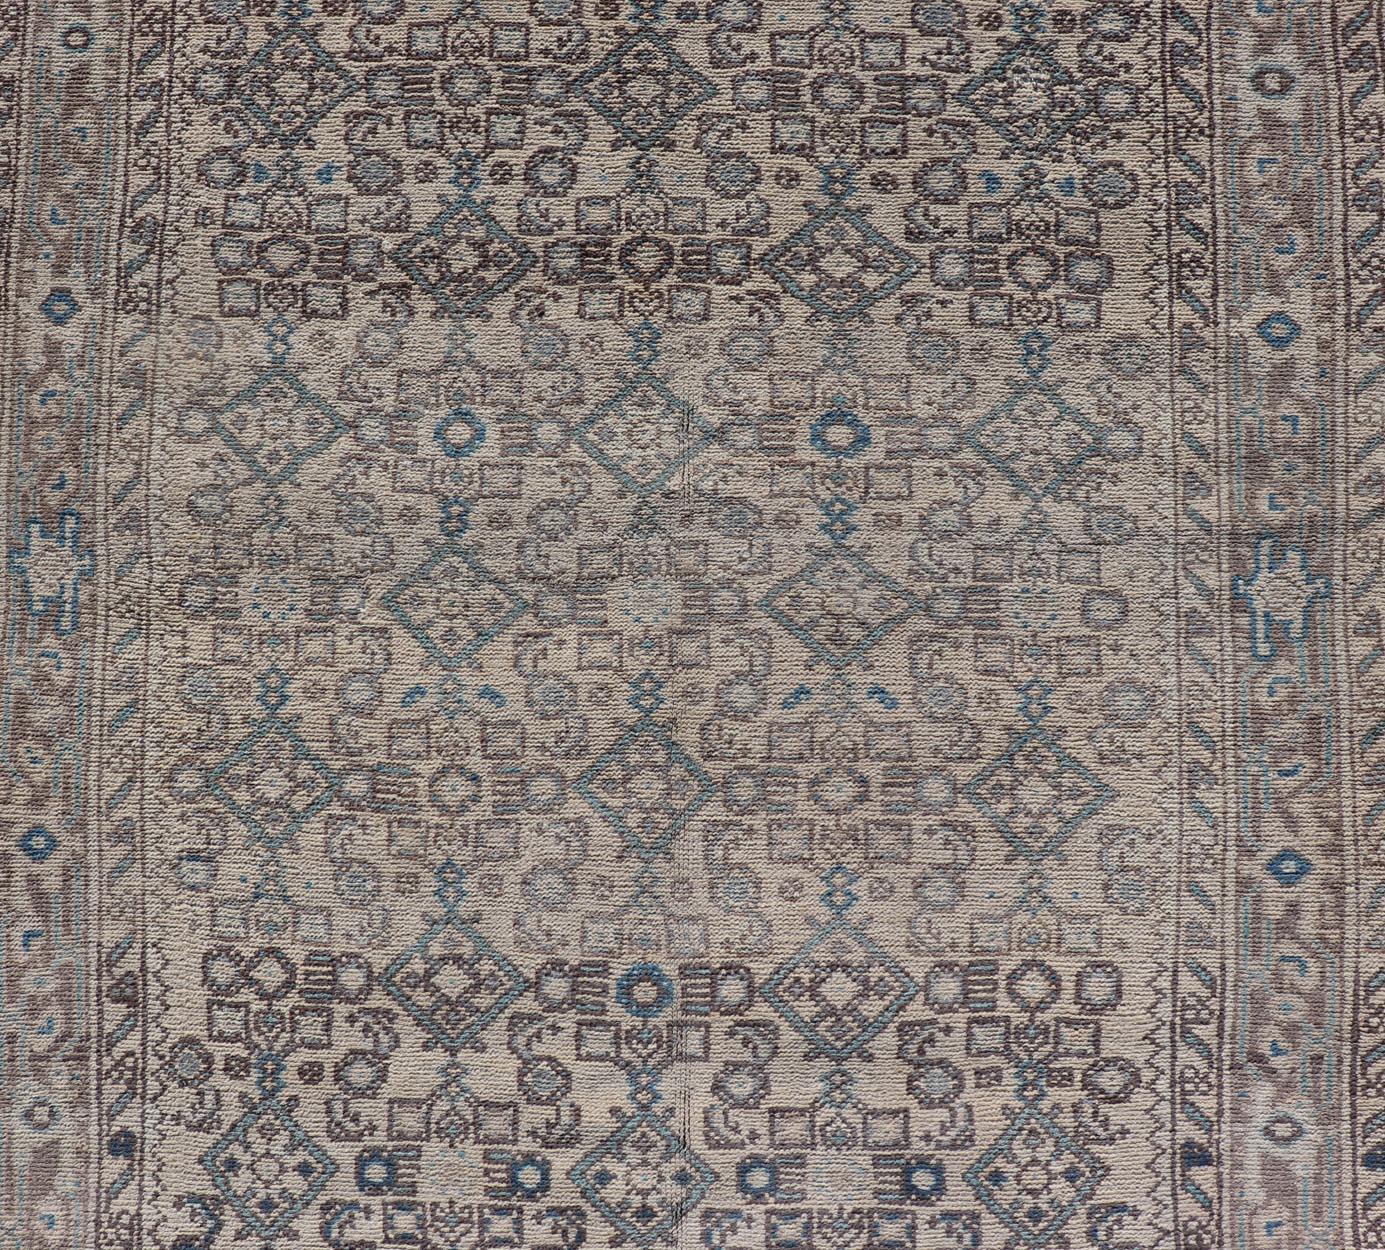 Hand-Knotted Vintage Persian Hamadan Runner in Cool Tones of Light Blue, Ivory, and L. Brown For Sale